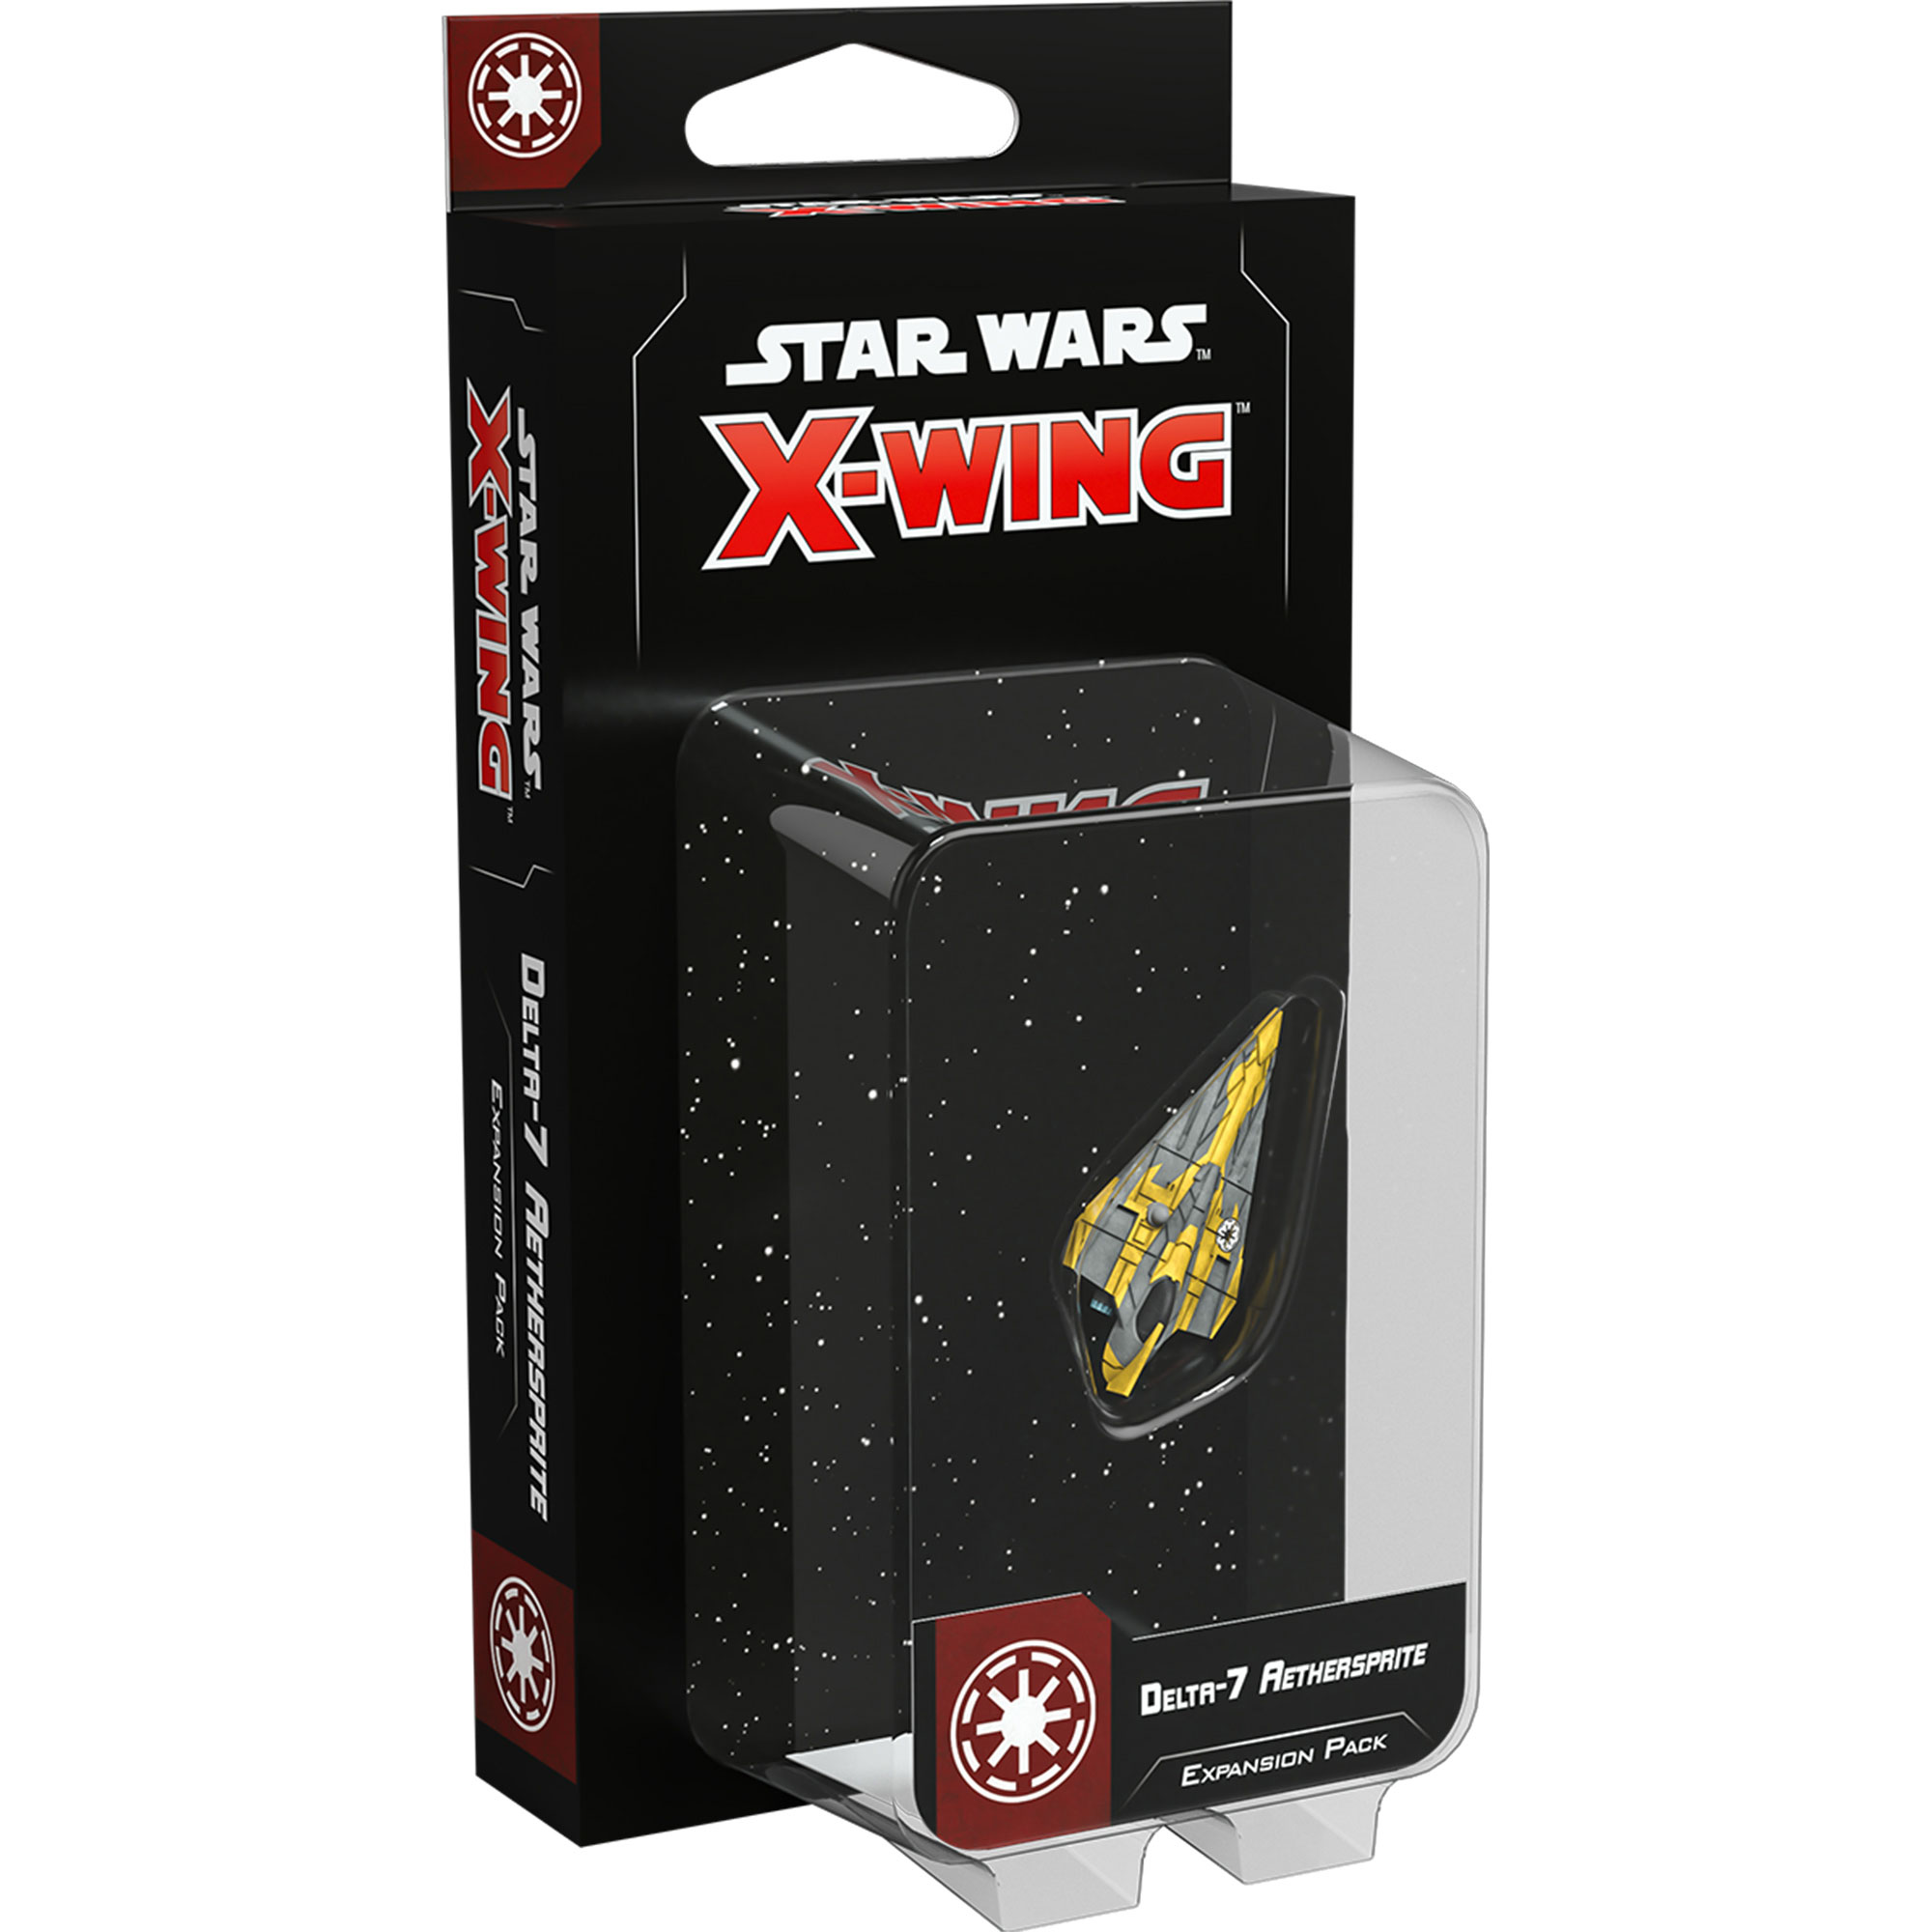 Fantasy Flight Games Star Wars: X-Wing (2nd Edition) - Delta-7 Aethersprite Expansion Pack